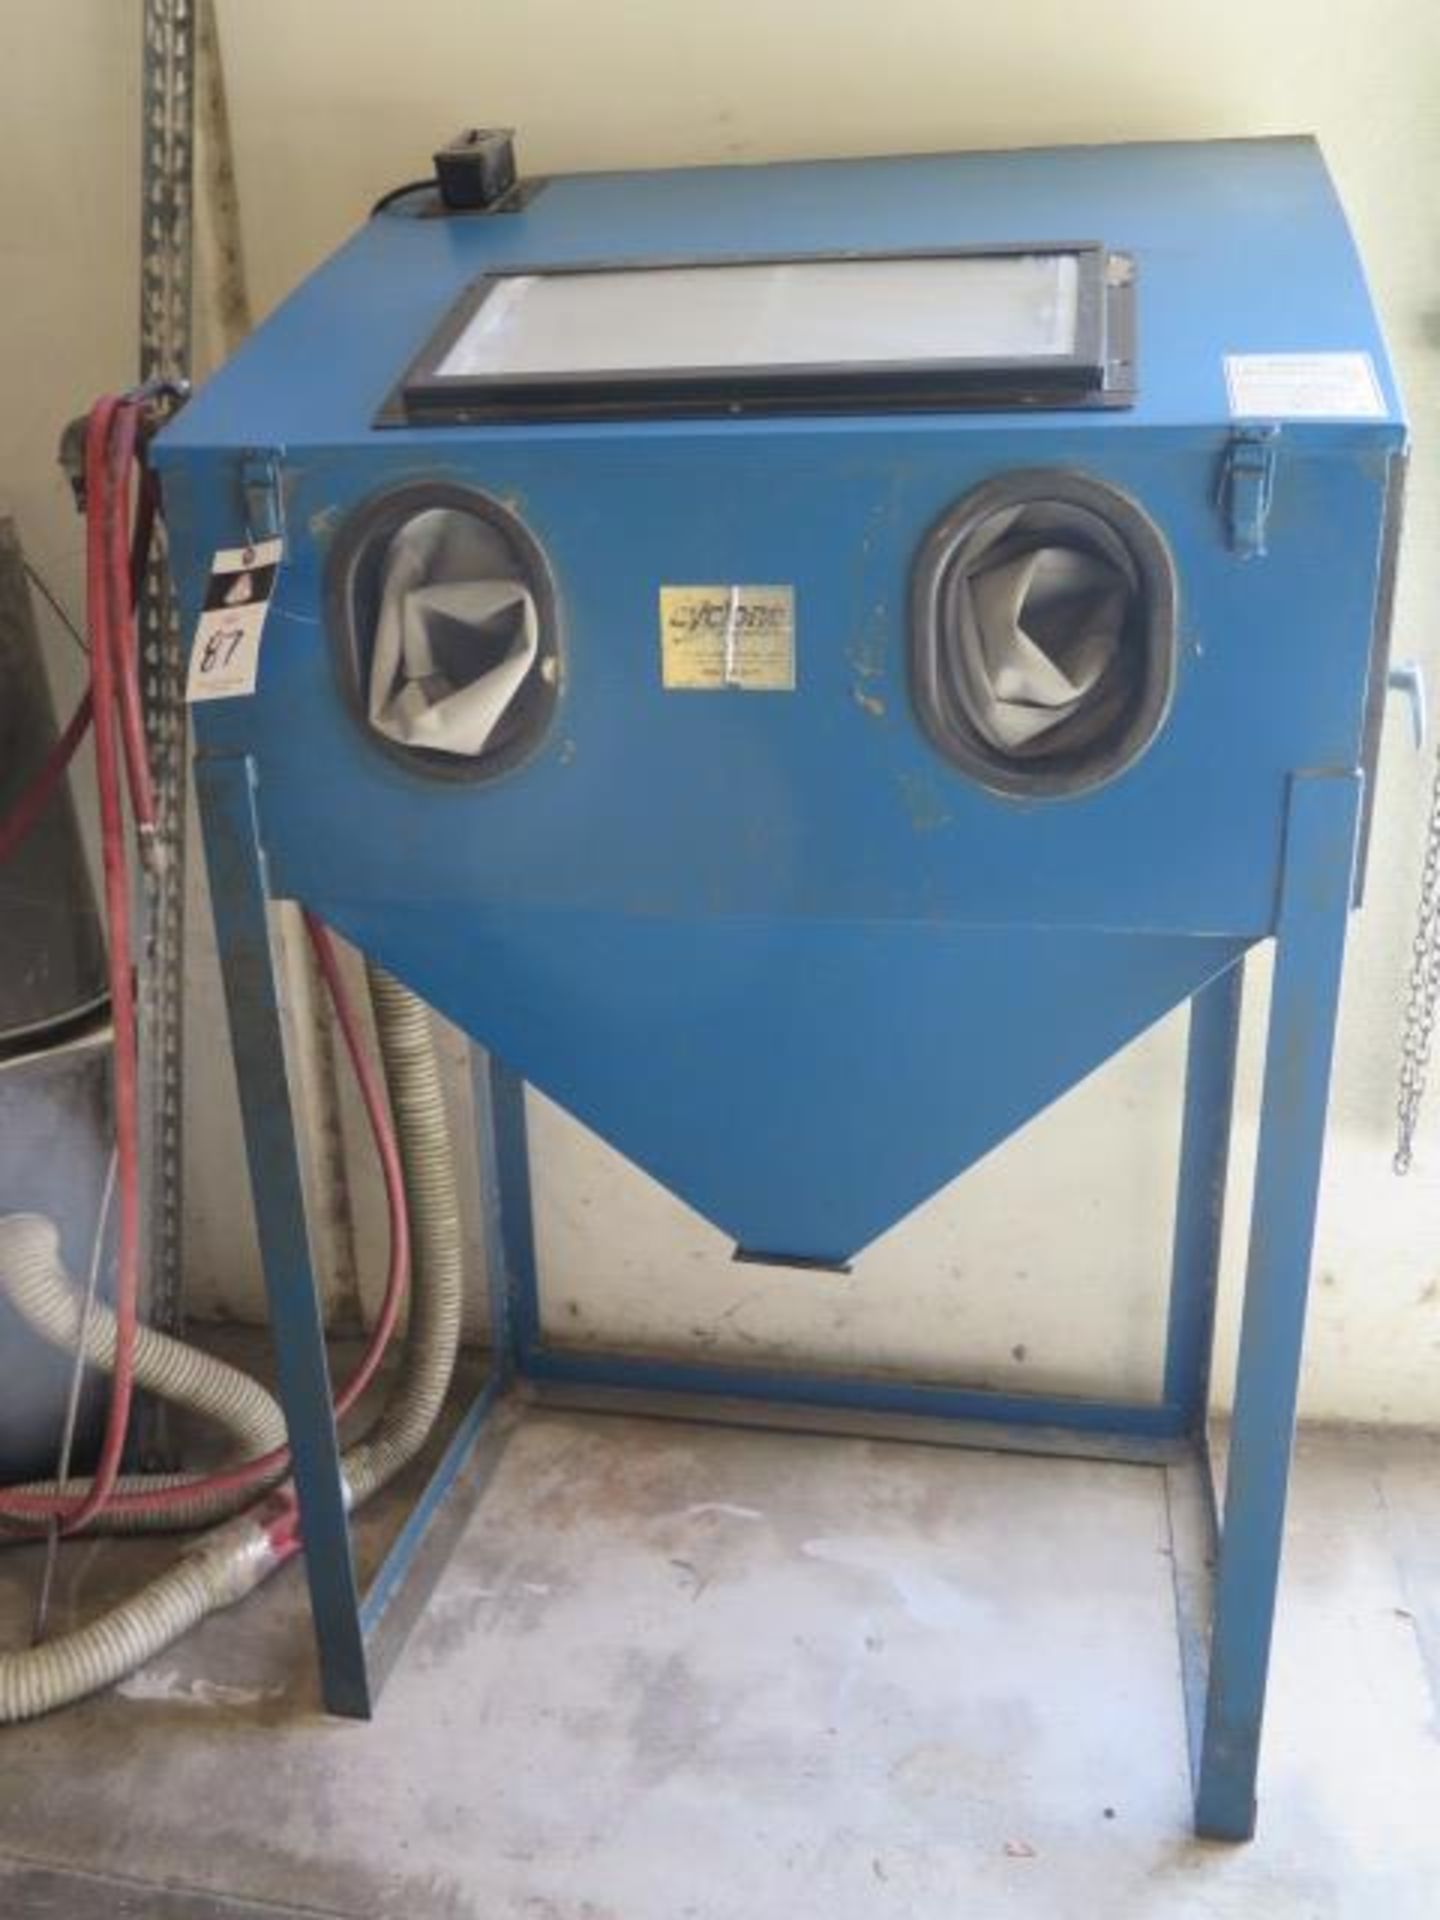 Cyclone Dry Blast Cabinet w/ Dust Collector (SOLD AS-IS - NO WARRANTY) - Image 2 of 6